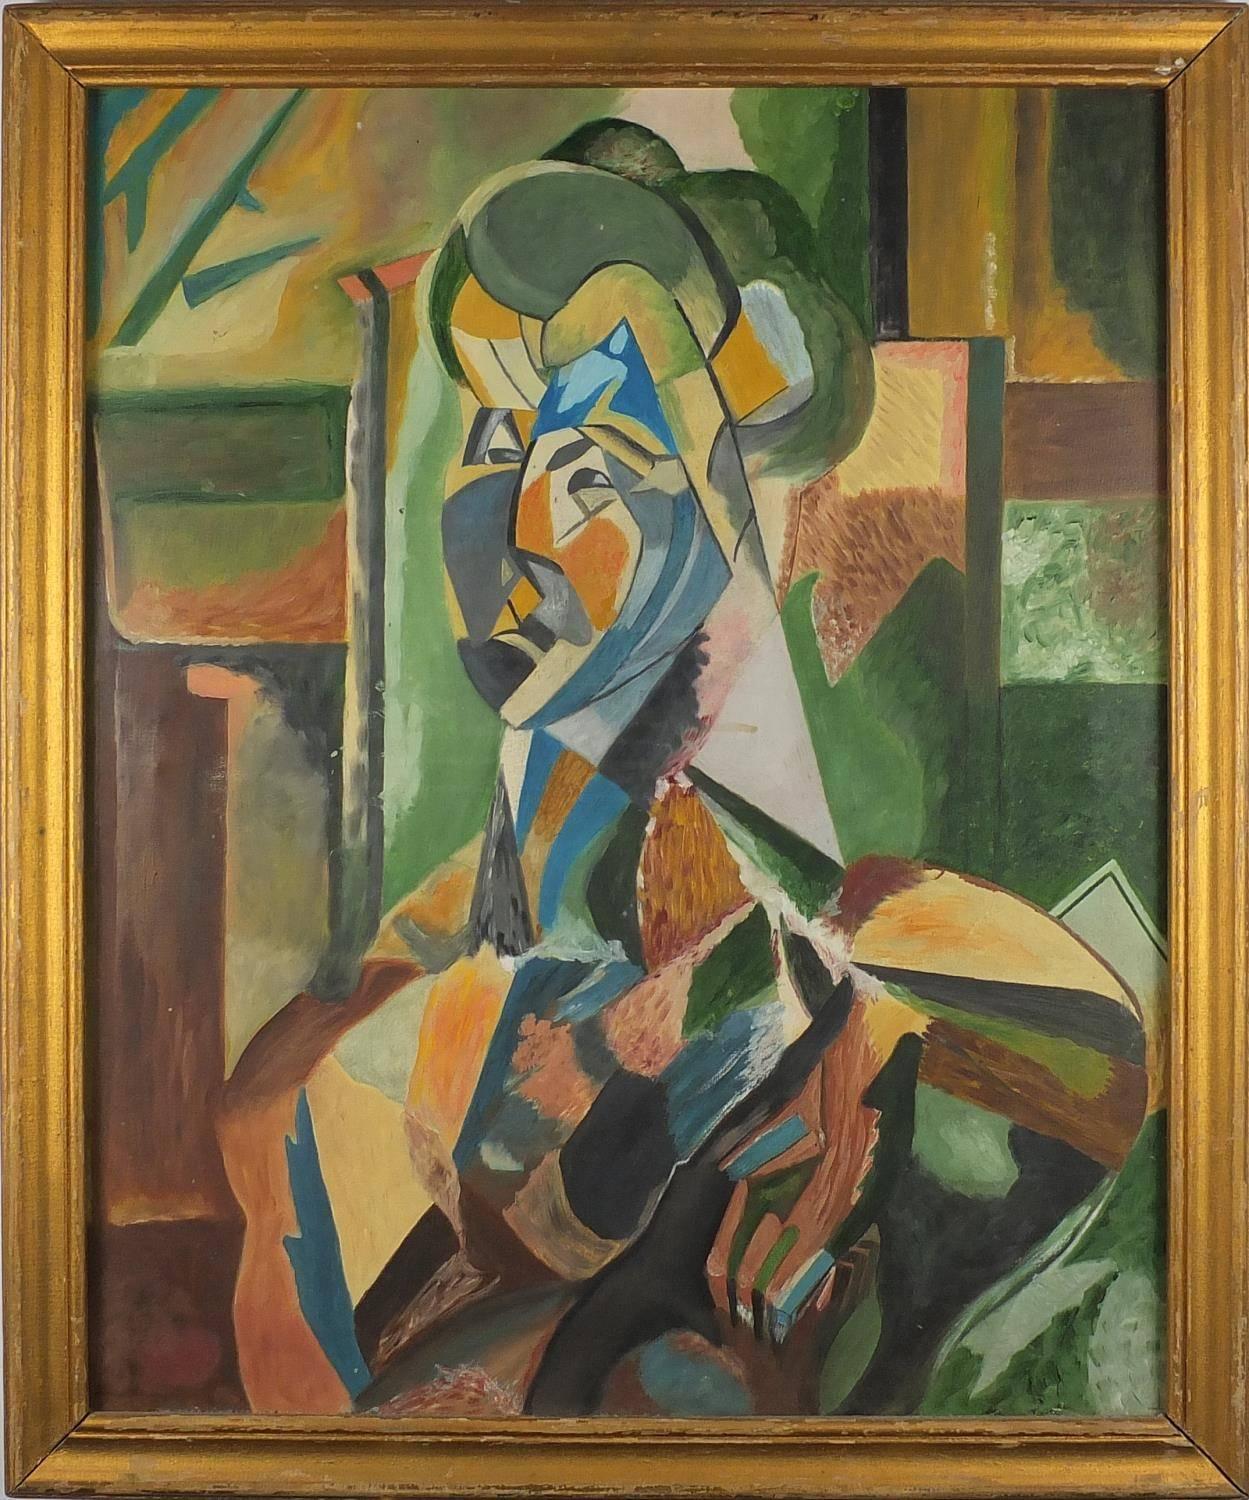 Femme Assise Cubist Portrait after Picasso - Painting by Alfred Challier